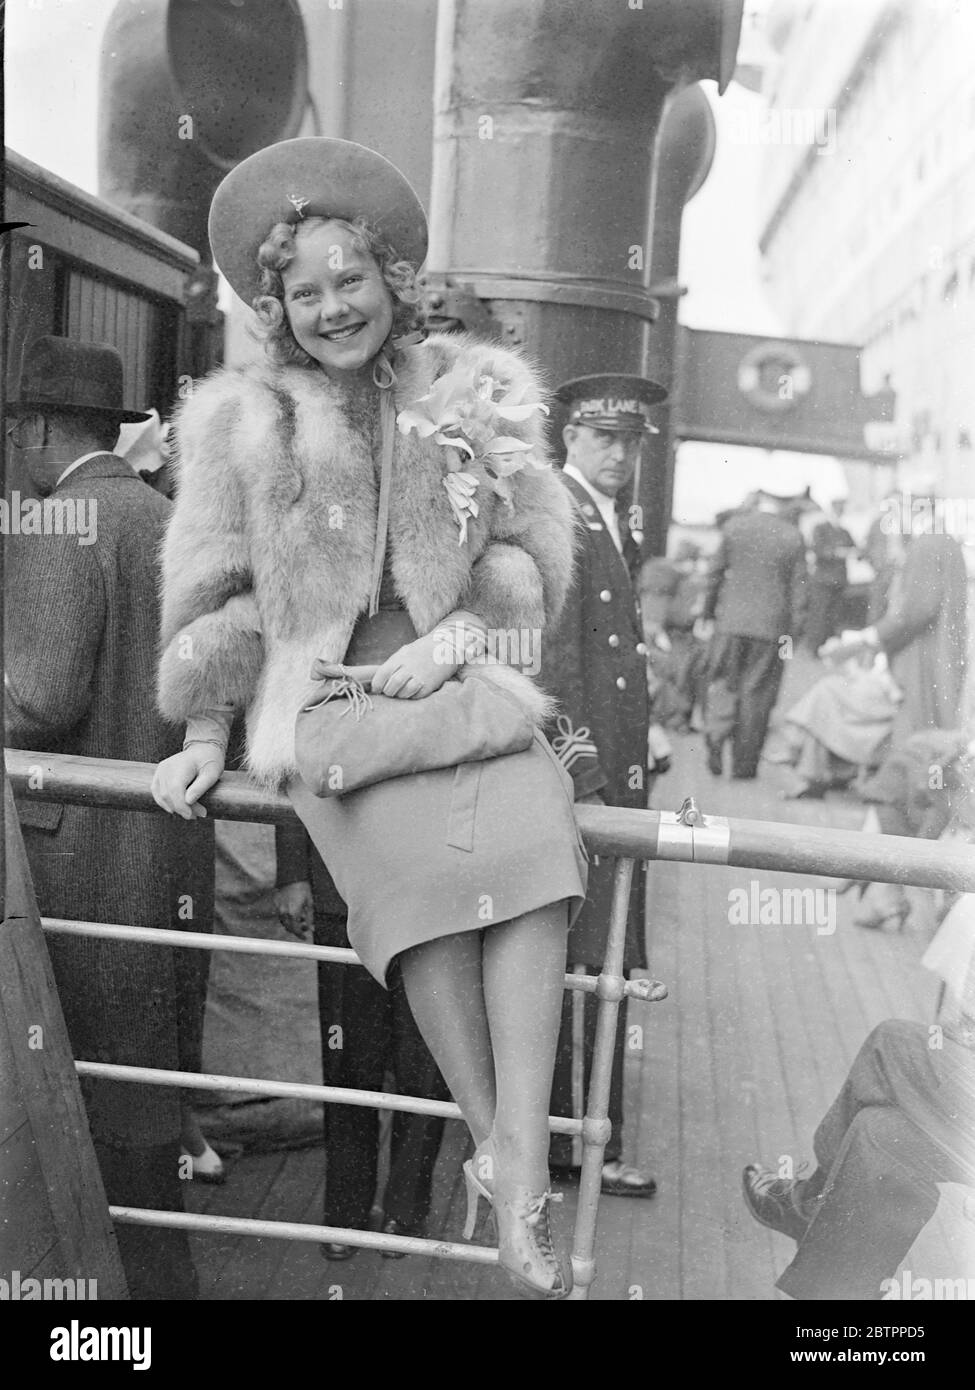 Sonja Henie arrives from America. Miss Sonja Henie, the skating film actress, arrived at Southampton on the liner 'Normandie' from America. Photo shows, Sonja Henie waving on arrival at Southampton. 4 July 1938 Stock Photo